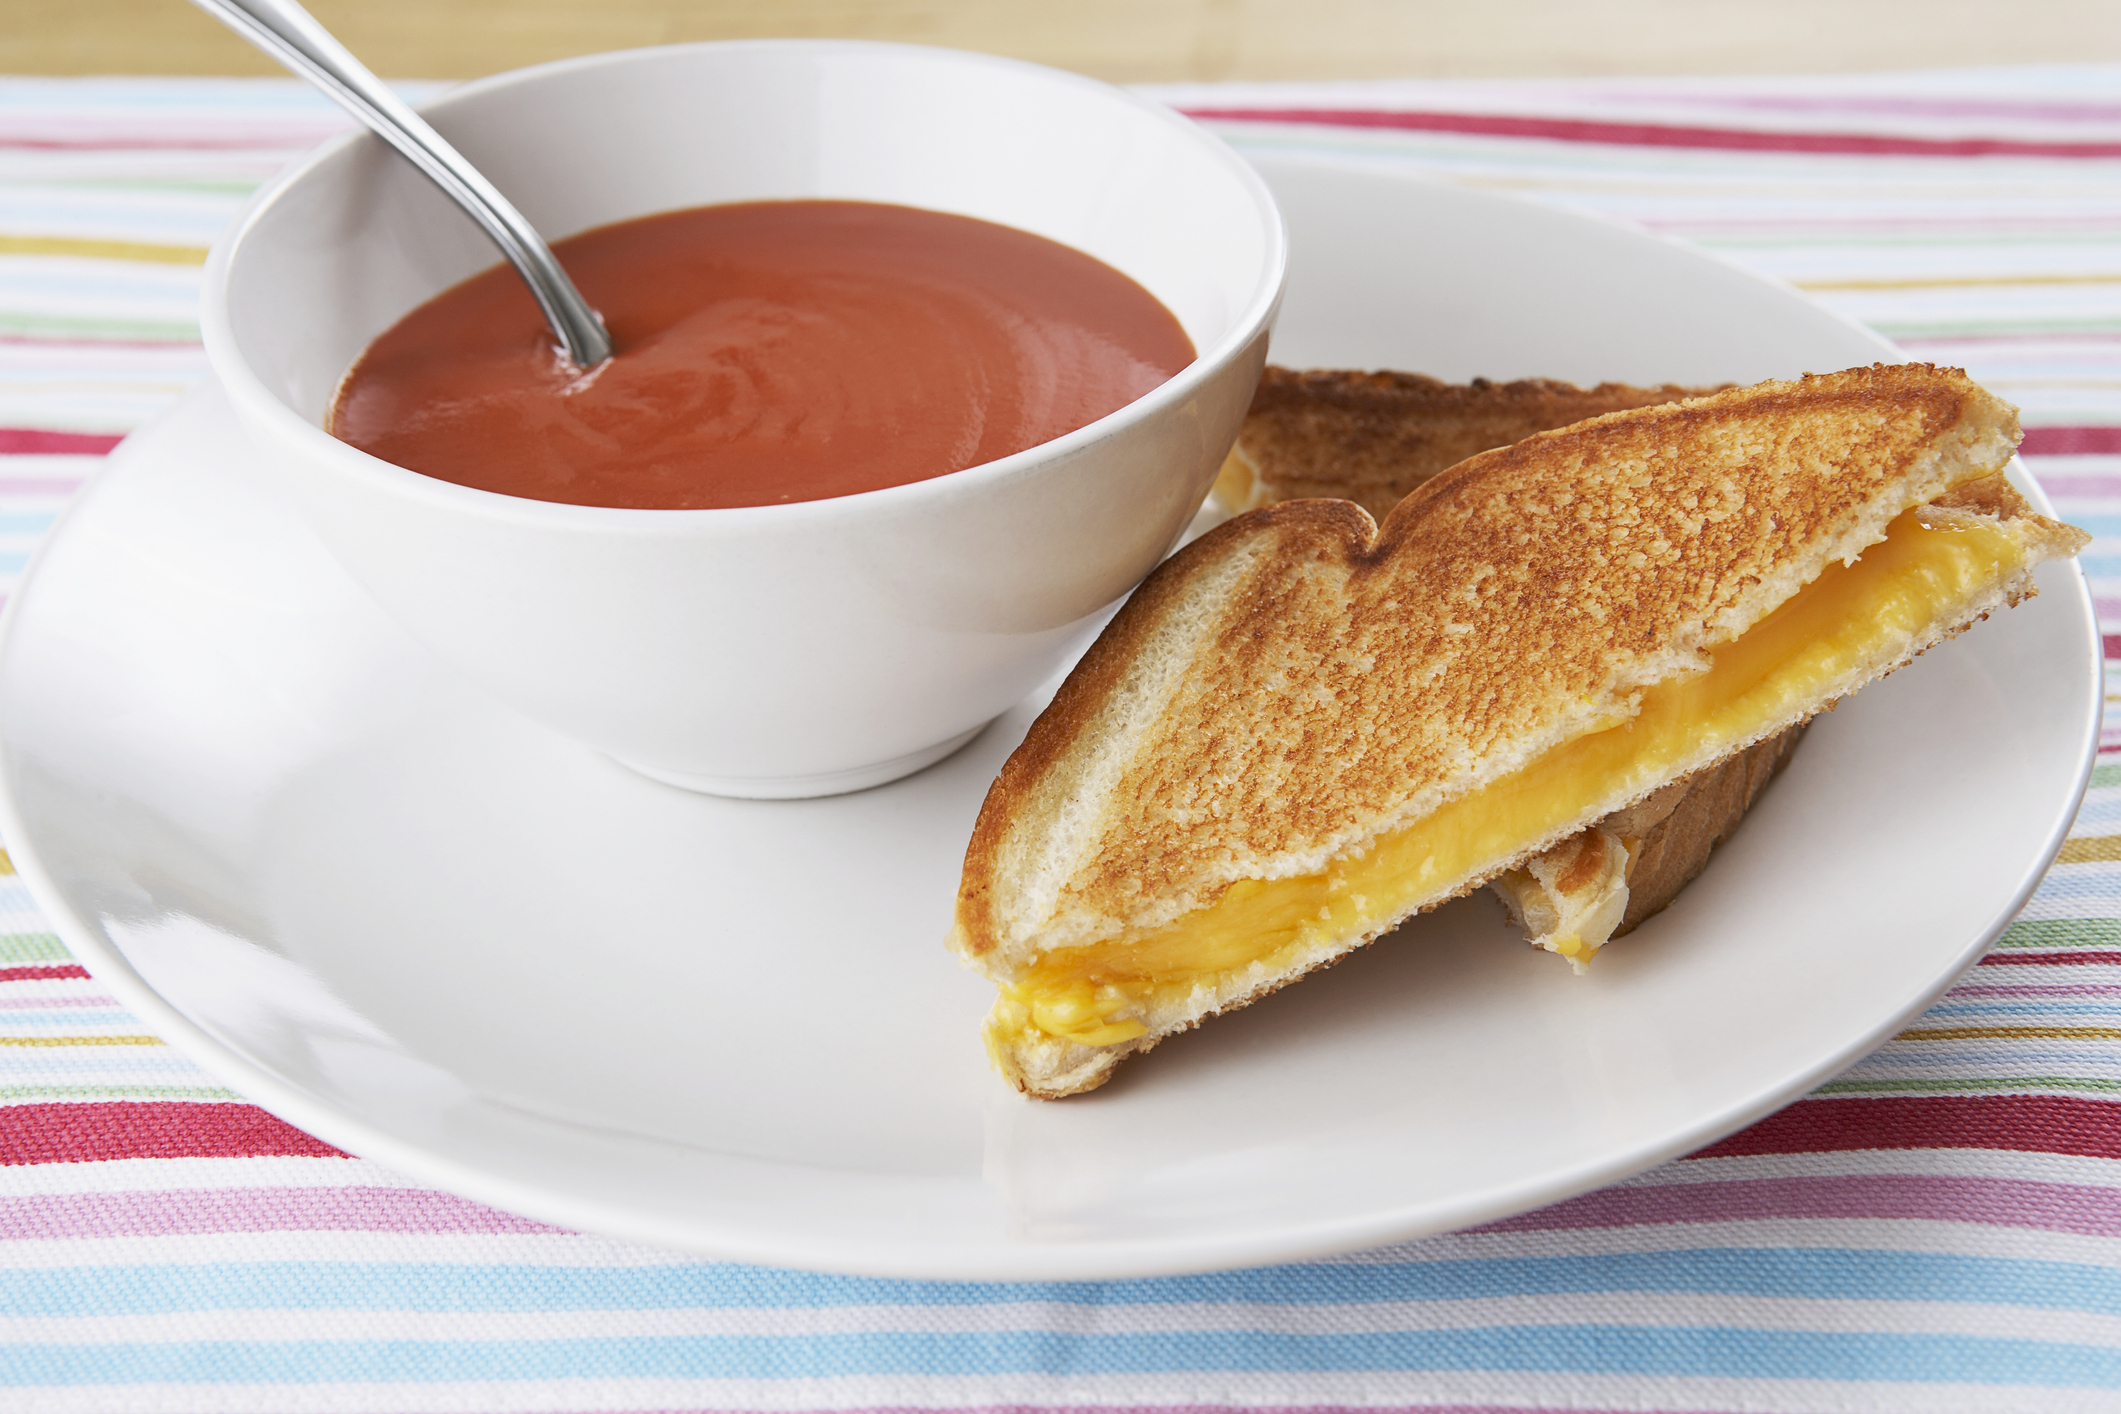 Bowl of tomato soup with a grilled cheese sandwich on a striped placemat